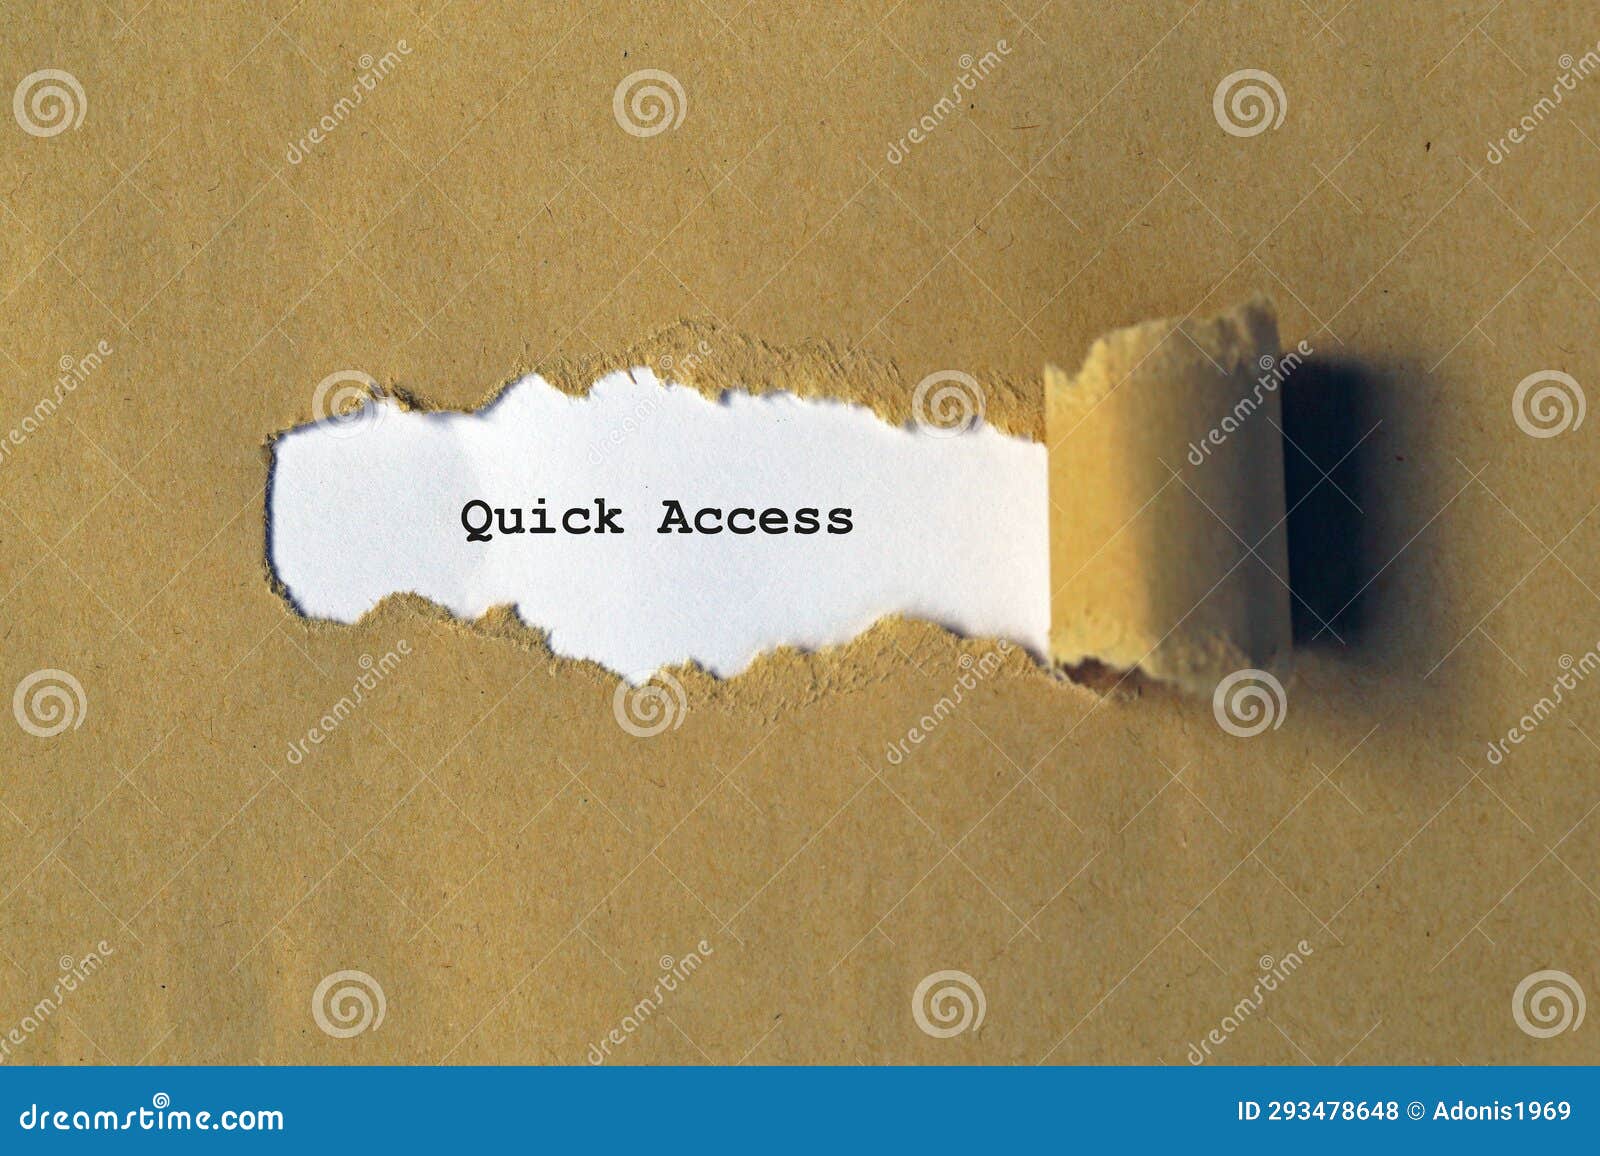 quick access on white paper